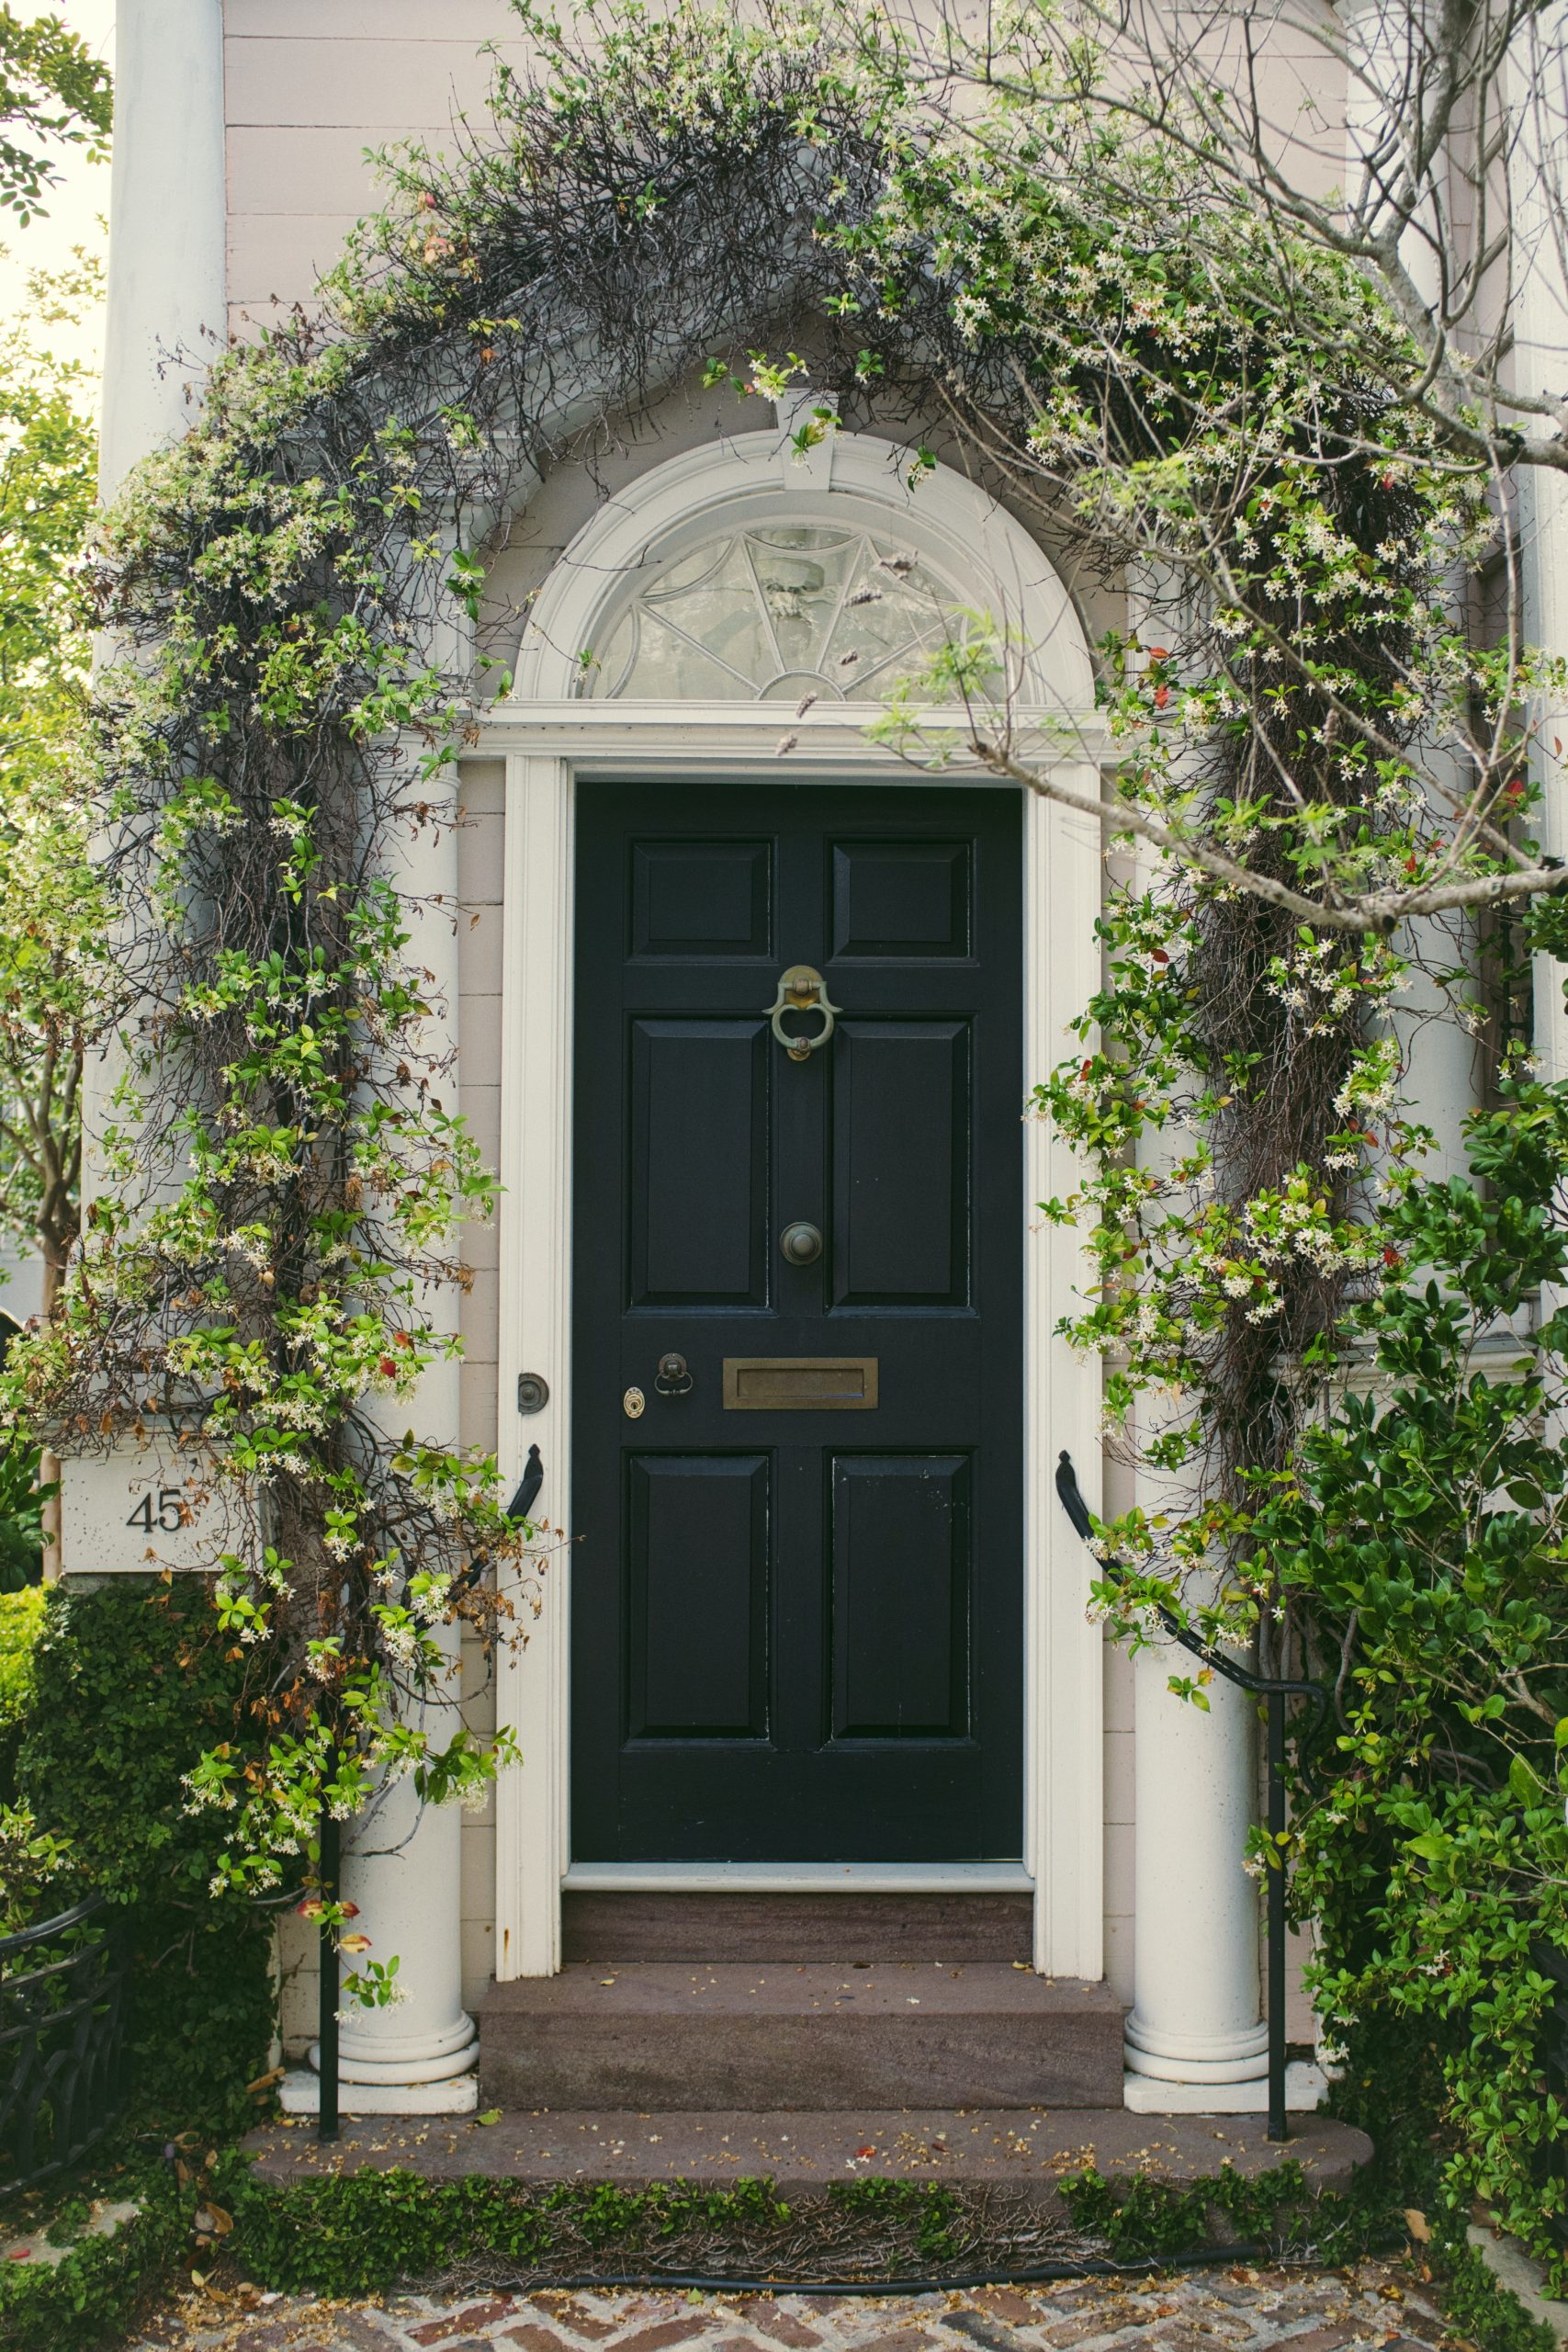 7 Effective Tips To Maintain The External Doors of Your House